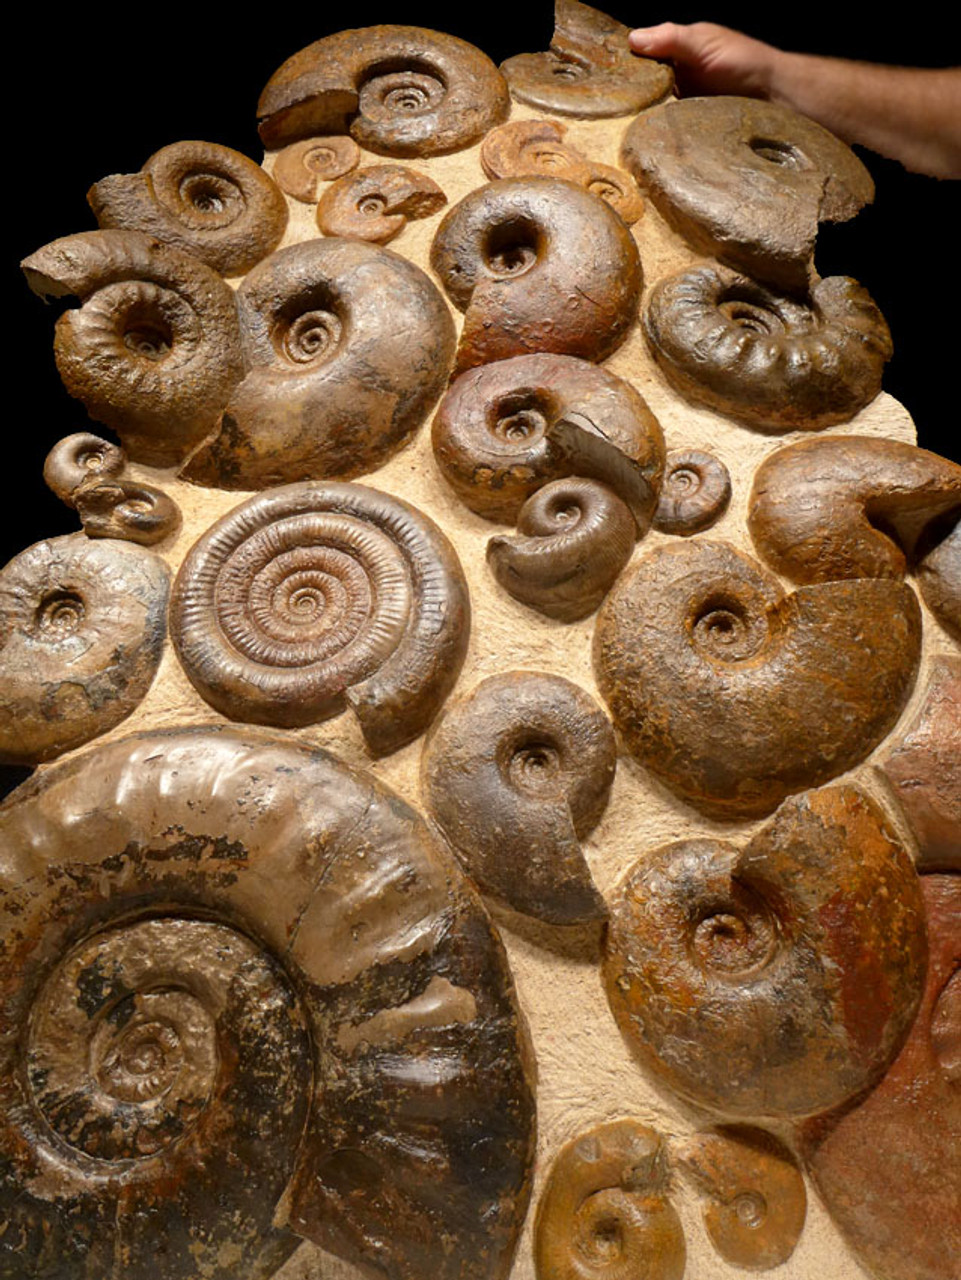 AMX331 - MASSIVE 36" AMMONITE WALL FILLED WITH 28 RARE JURASSIC OCEAN LIFE FOSSILS OF SUPERB PRESERVATION